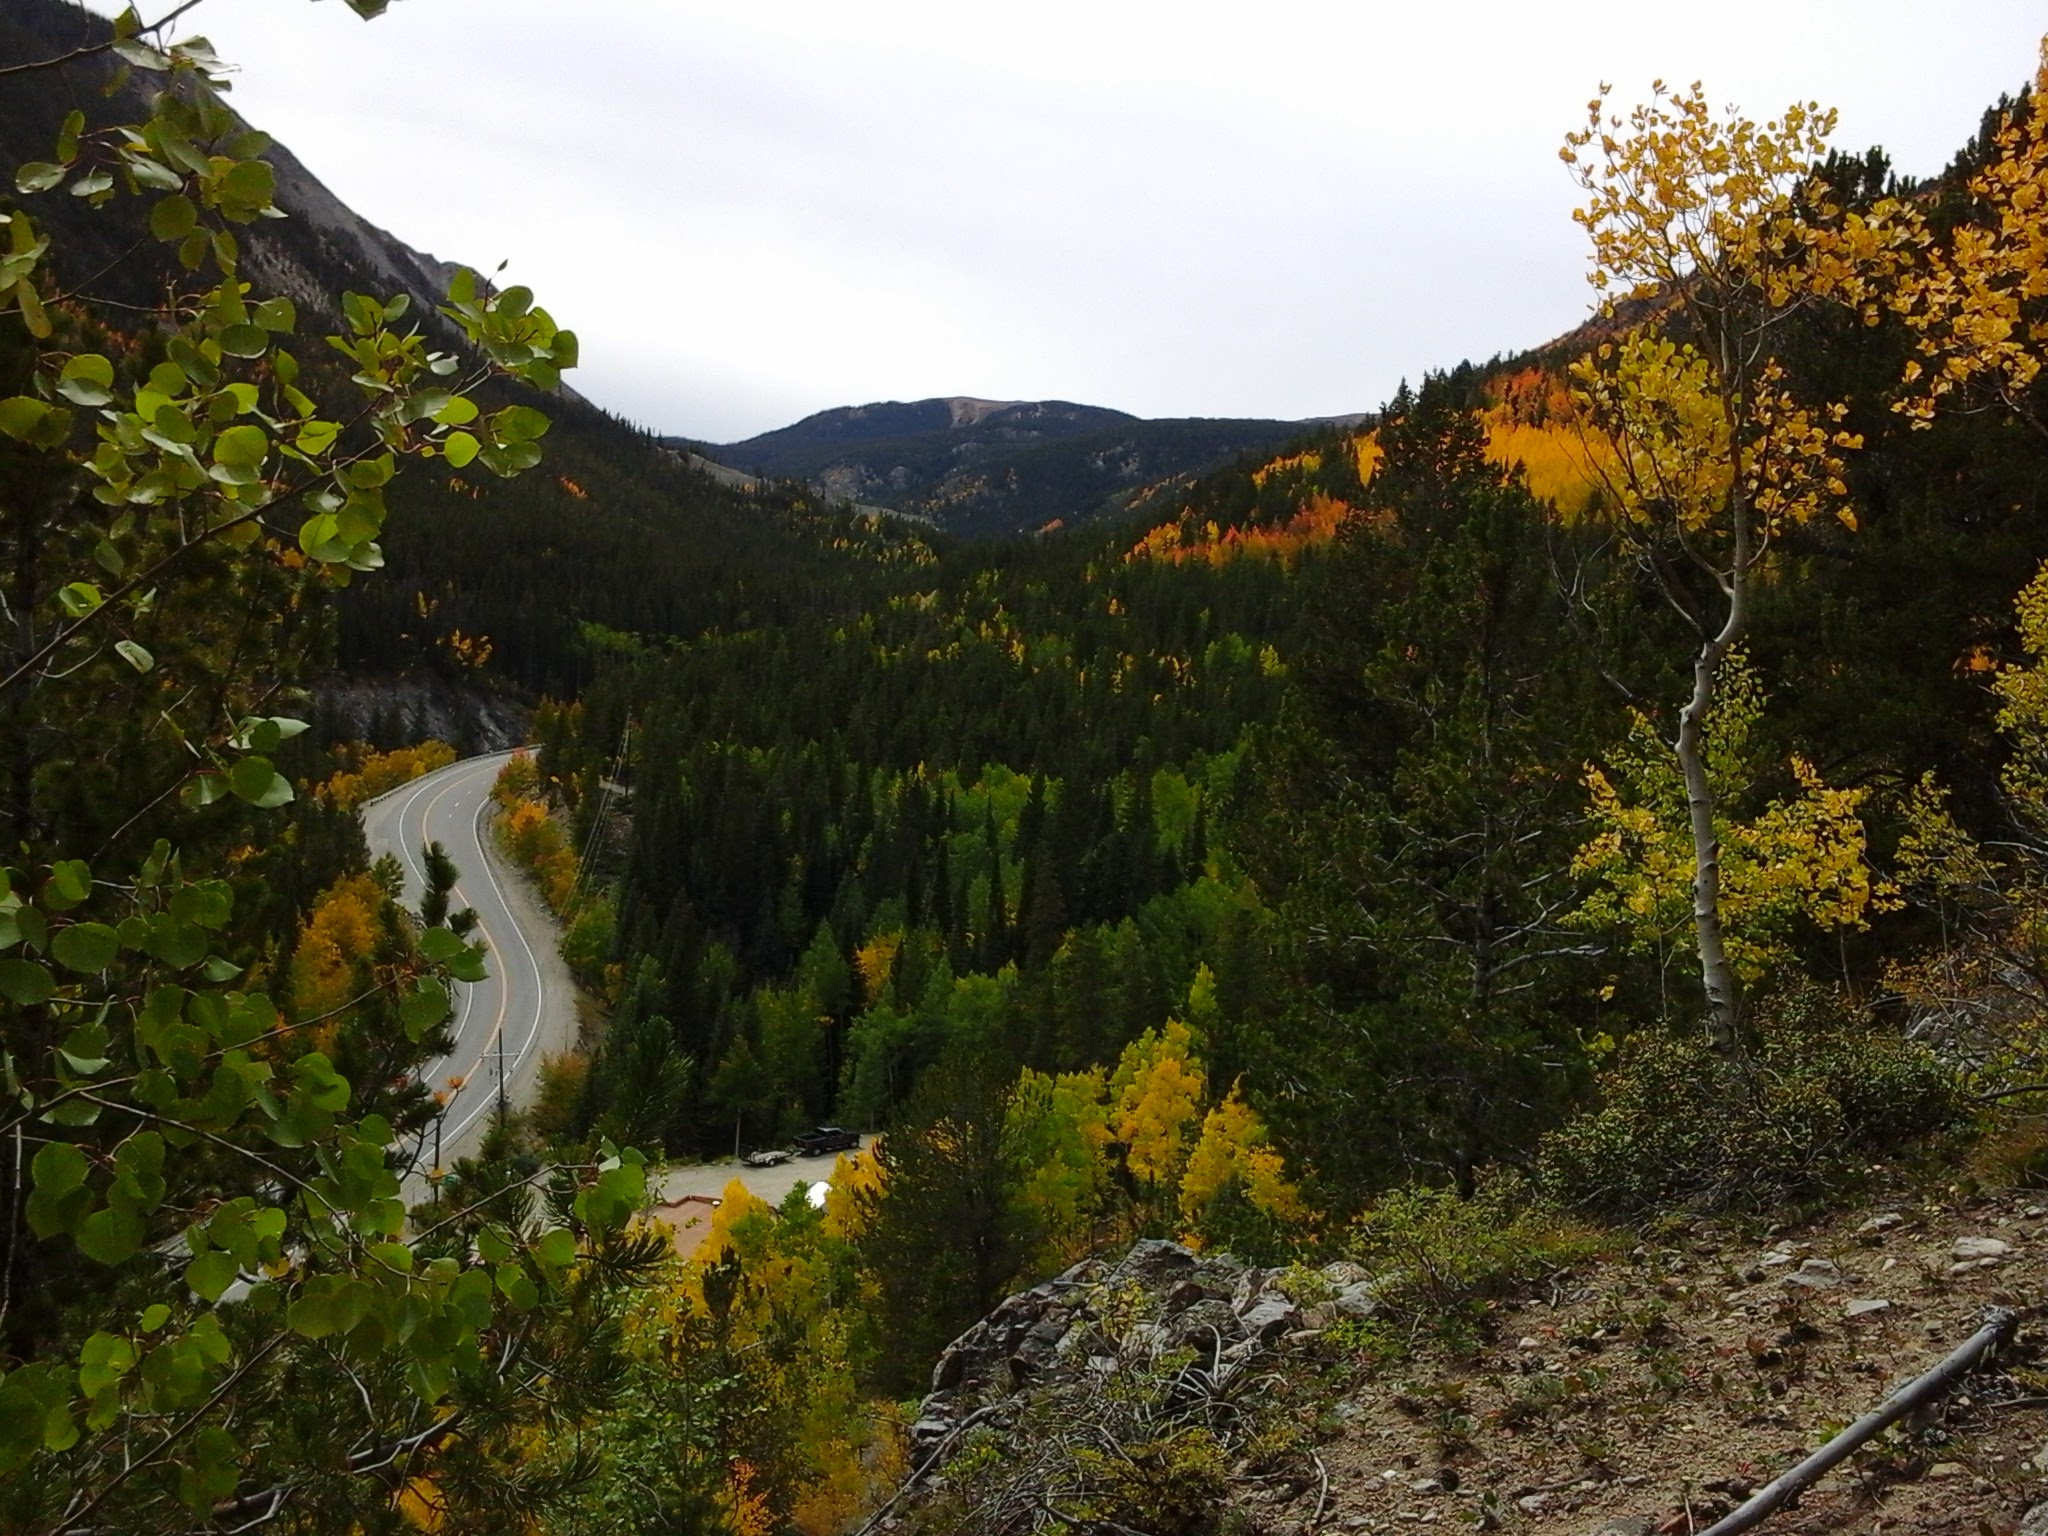 Fall colors in patches along a mountain pass.